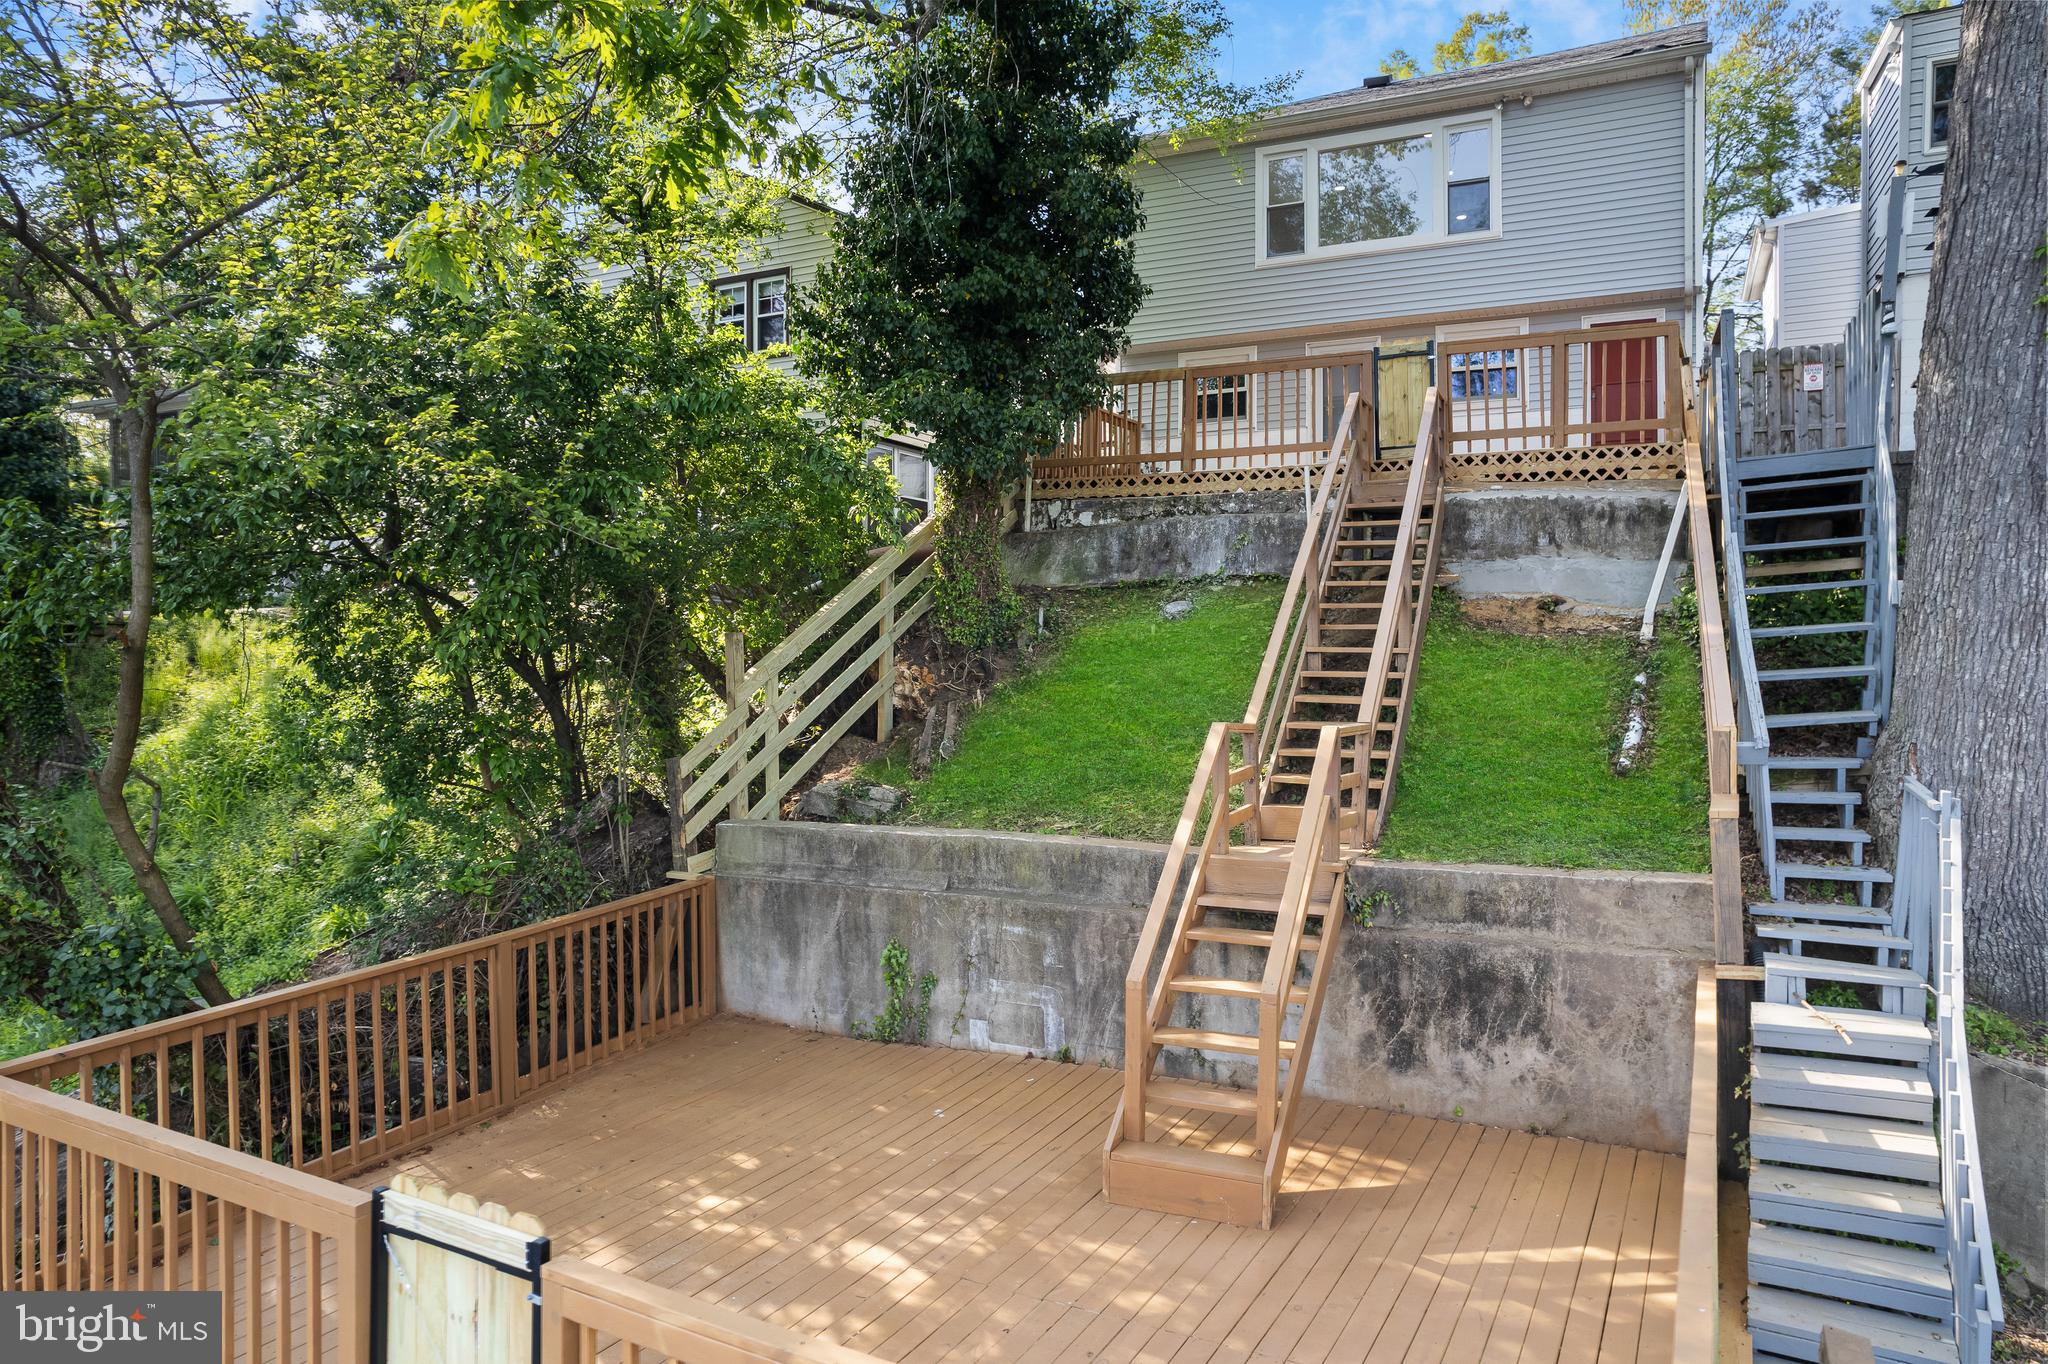 a view of a backyard with a deck